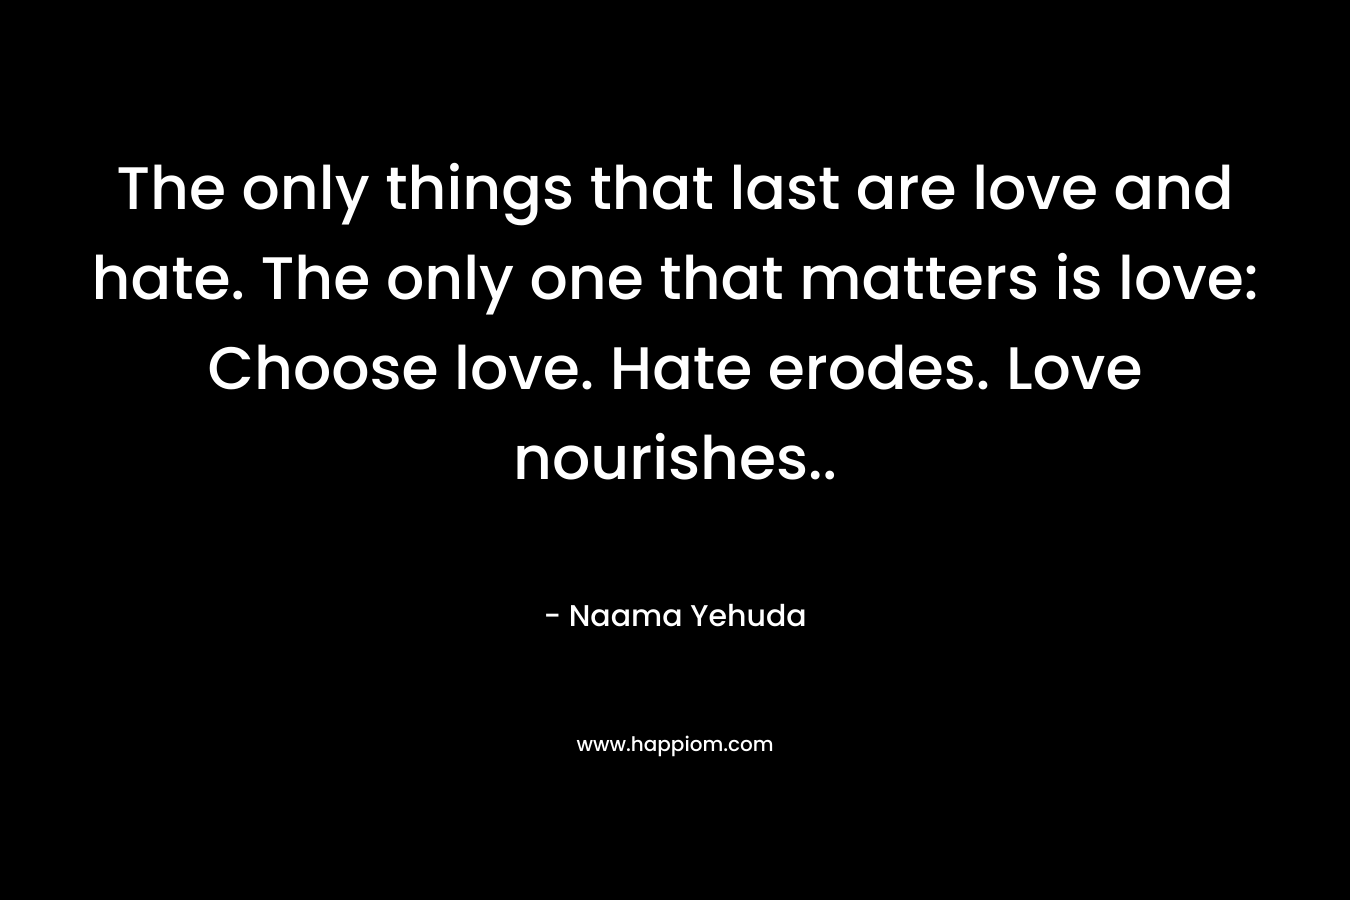 The only things that last are love and hate. The only one that matters is love: Choose love. Hate erodes. Love nourishes..